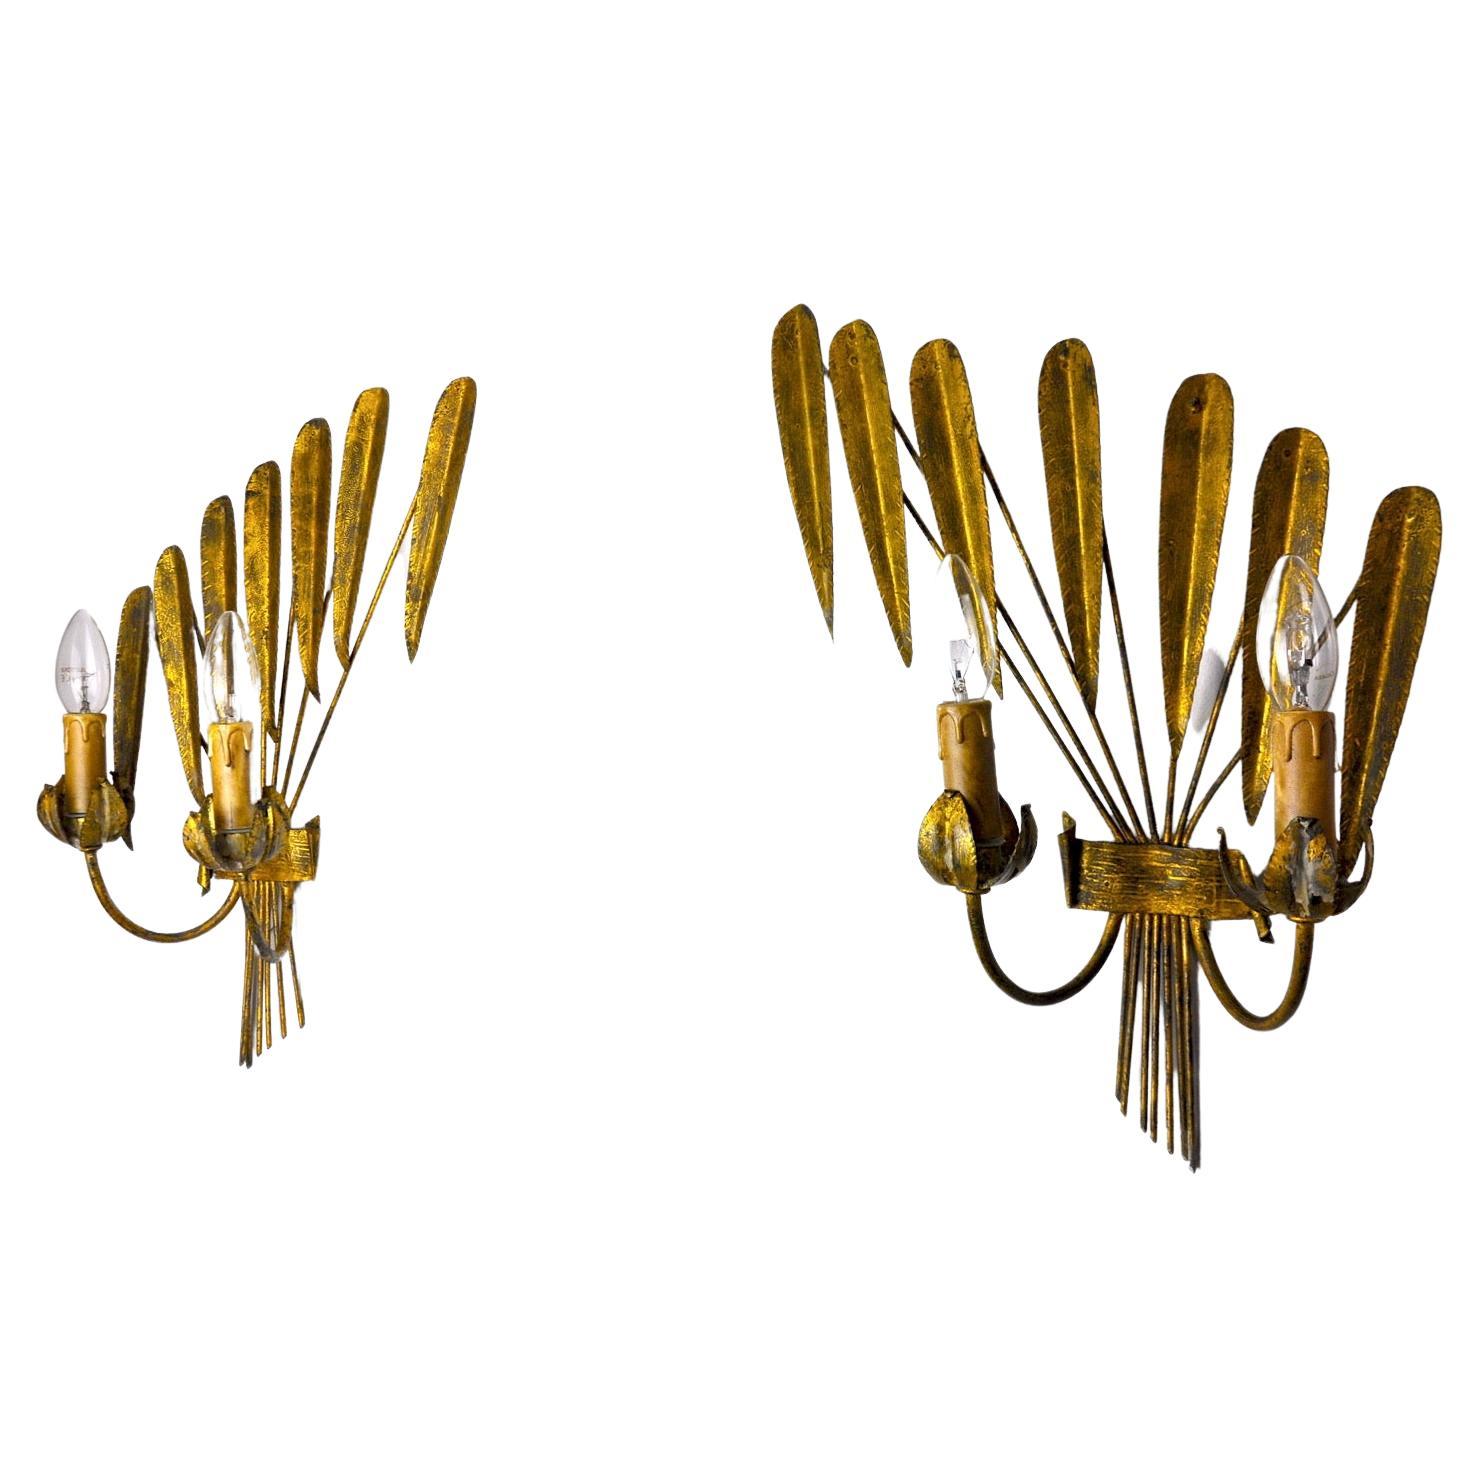 Pair of Floral Sconces by Ferro Arte, Gold Leaf, Spain, 1960 For Sale